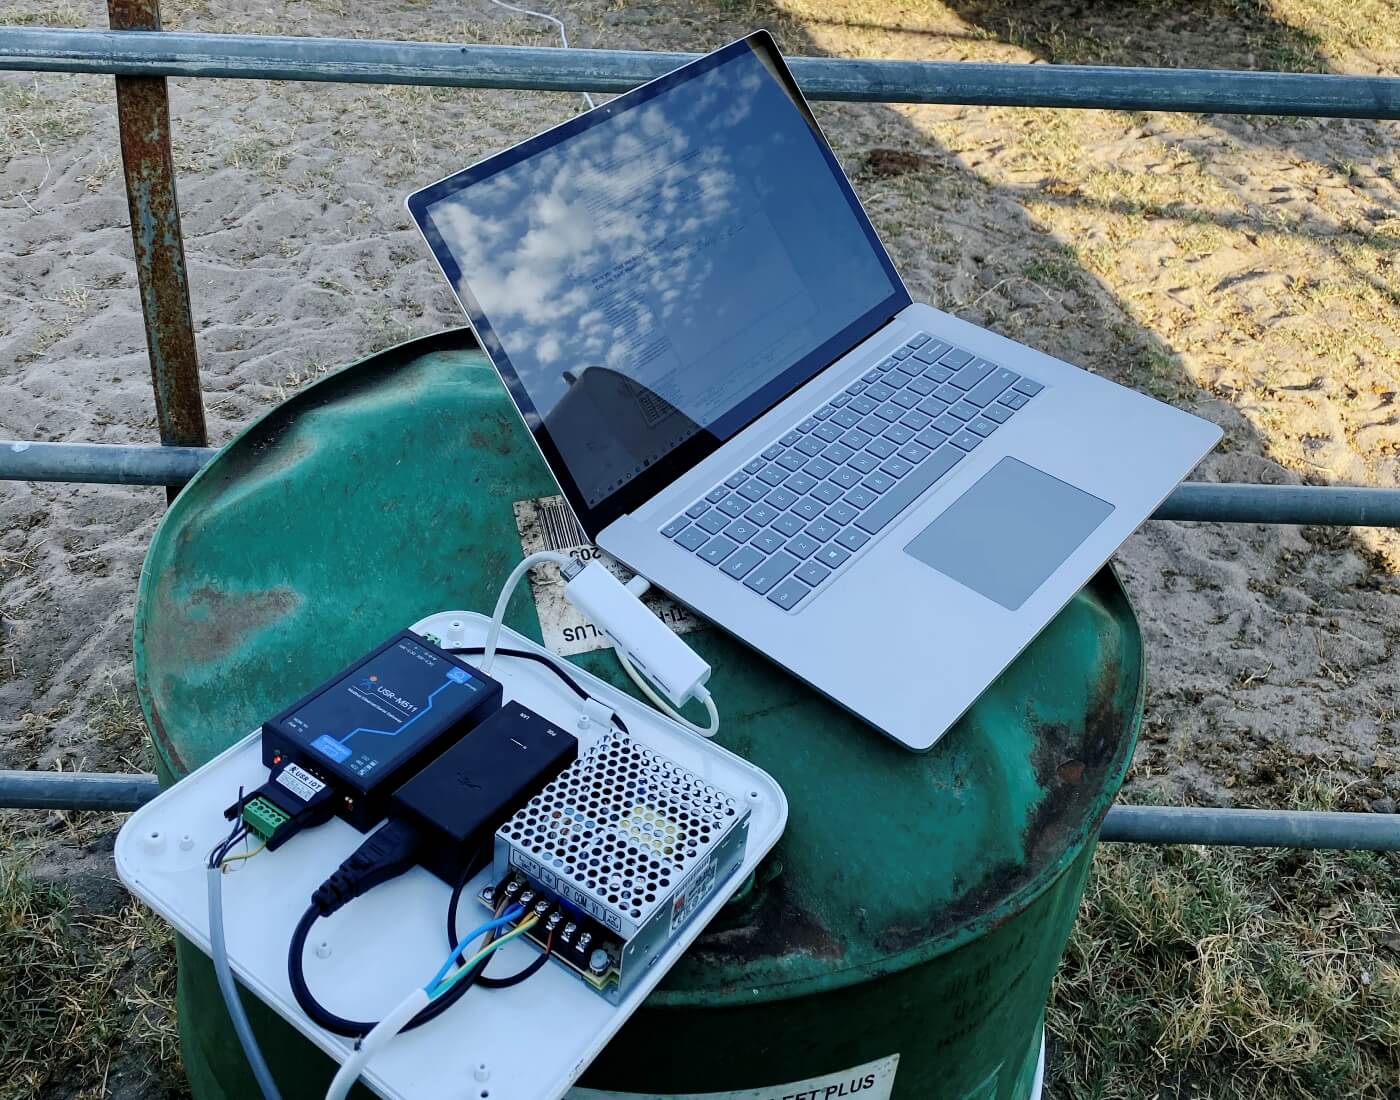 Electronics being tested in the field